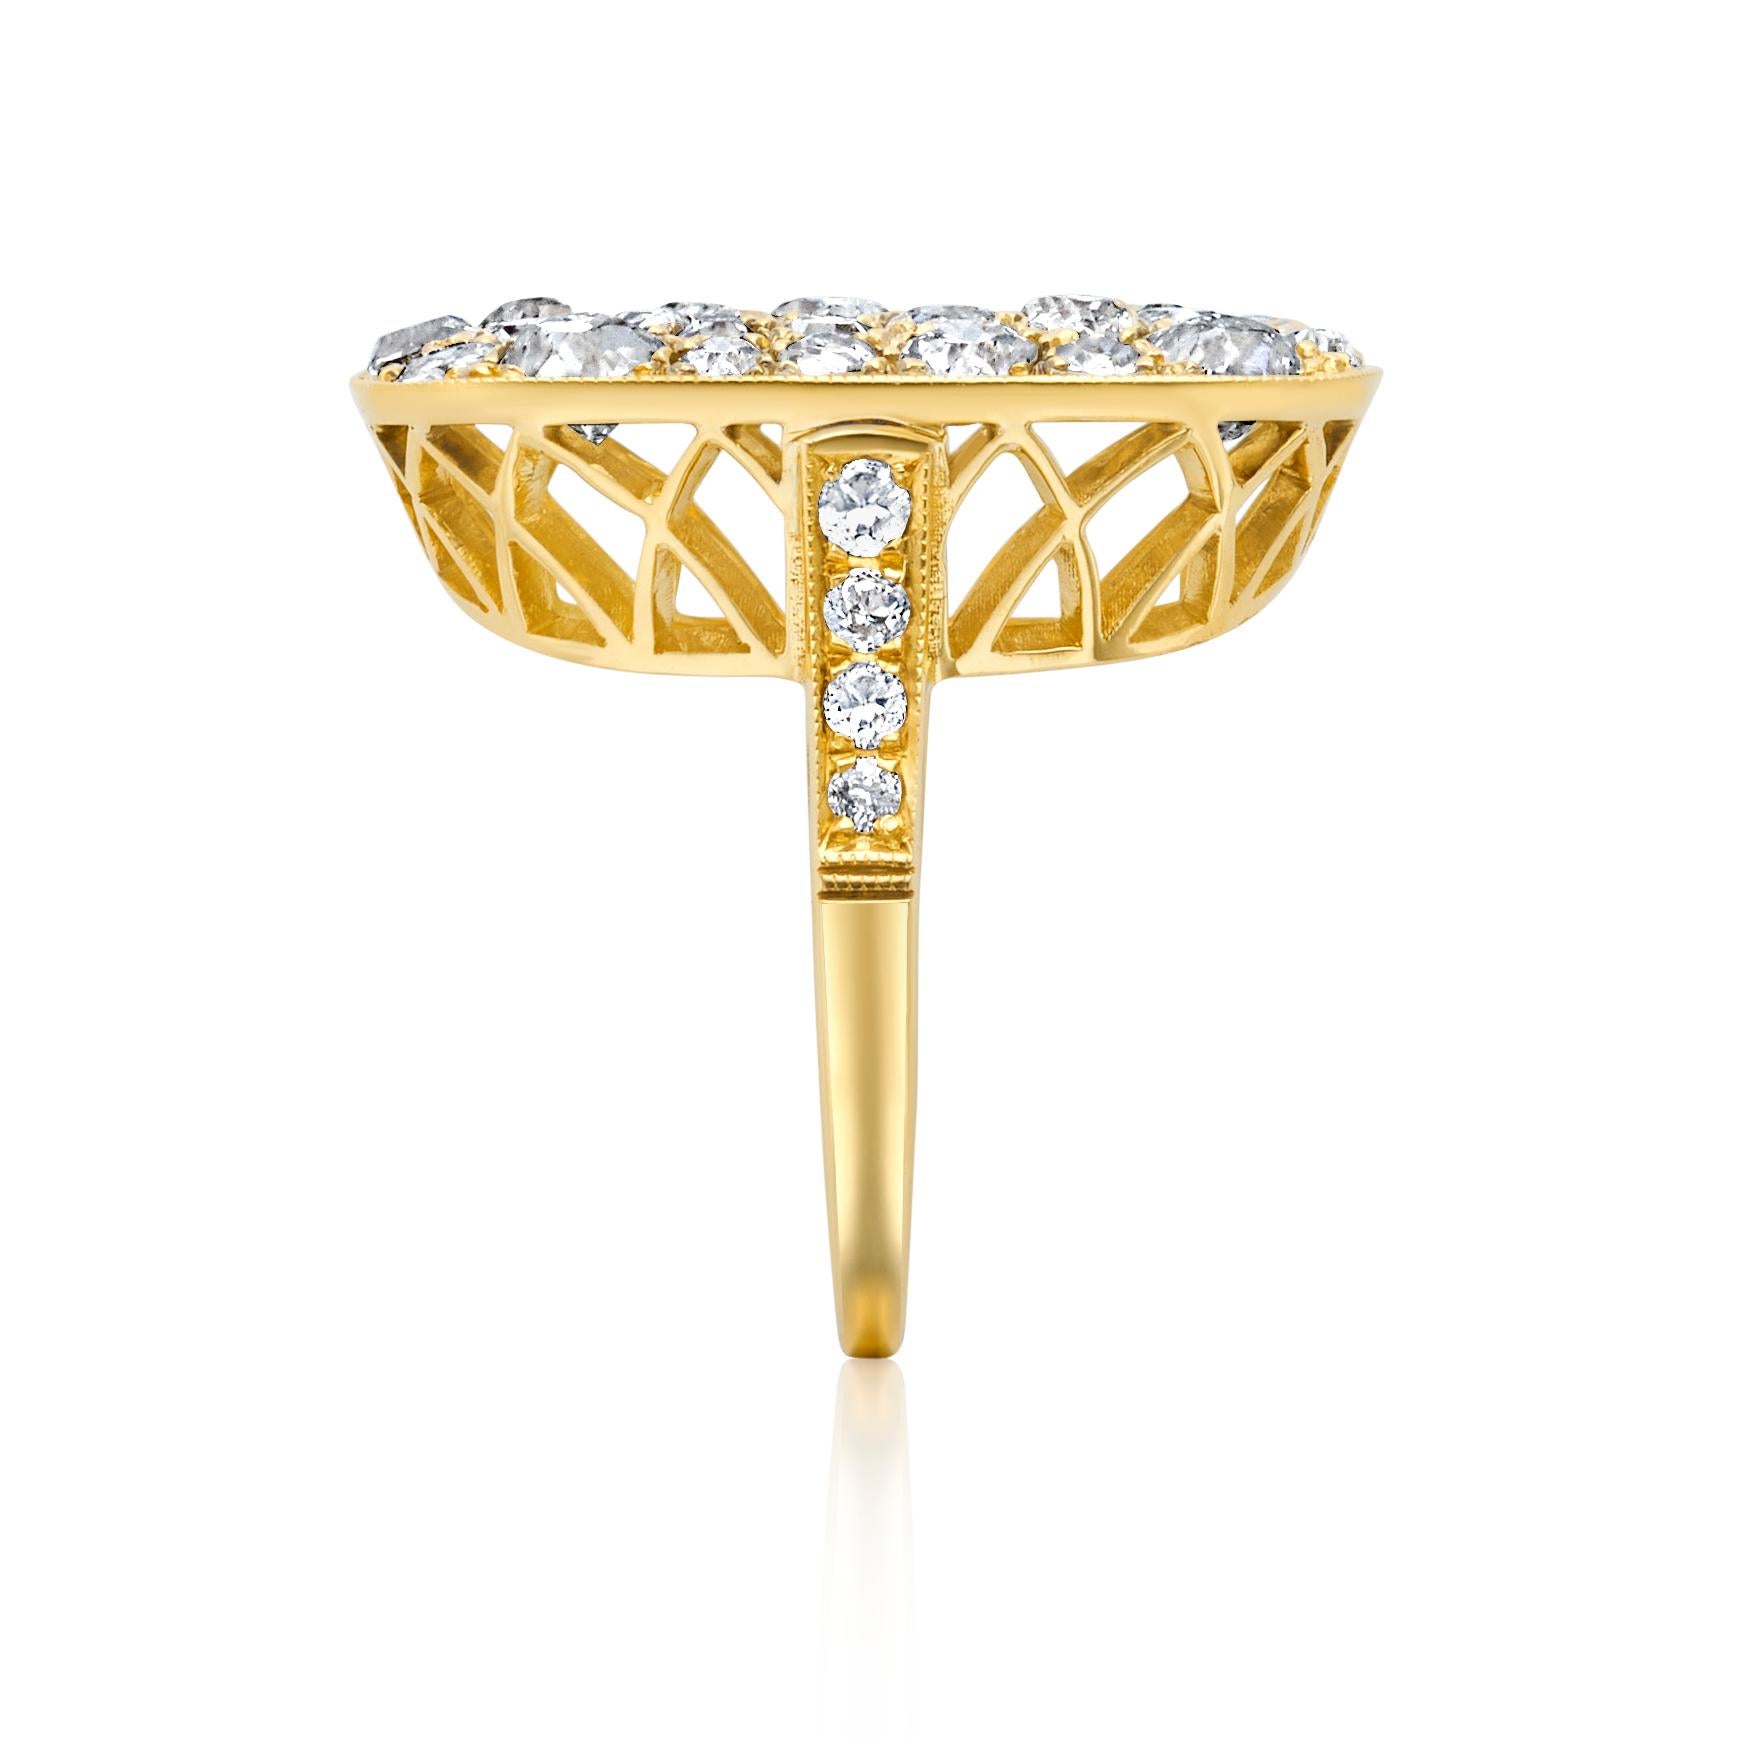 From designer Single Stone, circa 2000’s, 18 karat yellow gold diamond cobblestone ring. This ring is crafted with 58 pave round old European cut diamonds in an assortment of different sizes. These diamonds have an approximate combined weight of